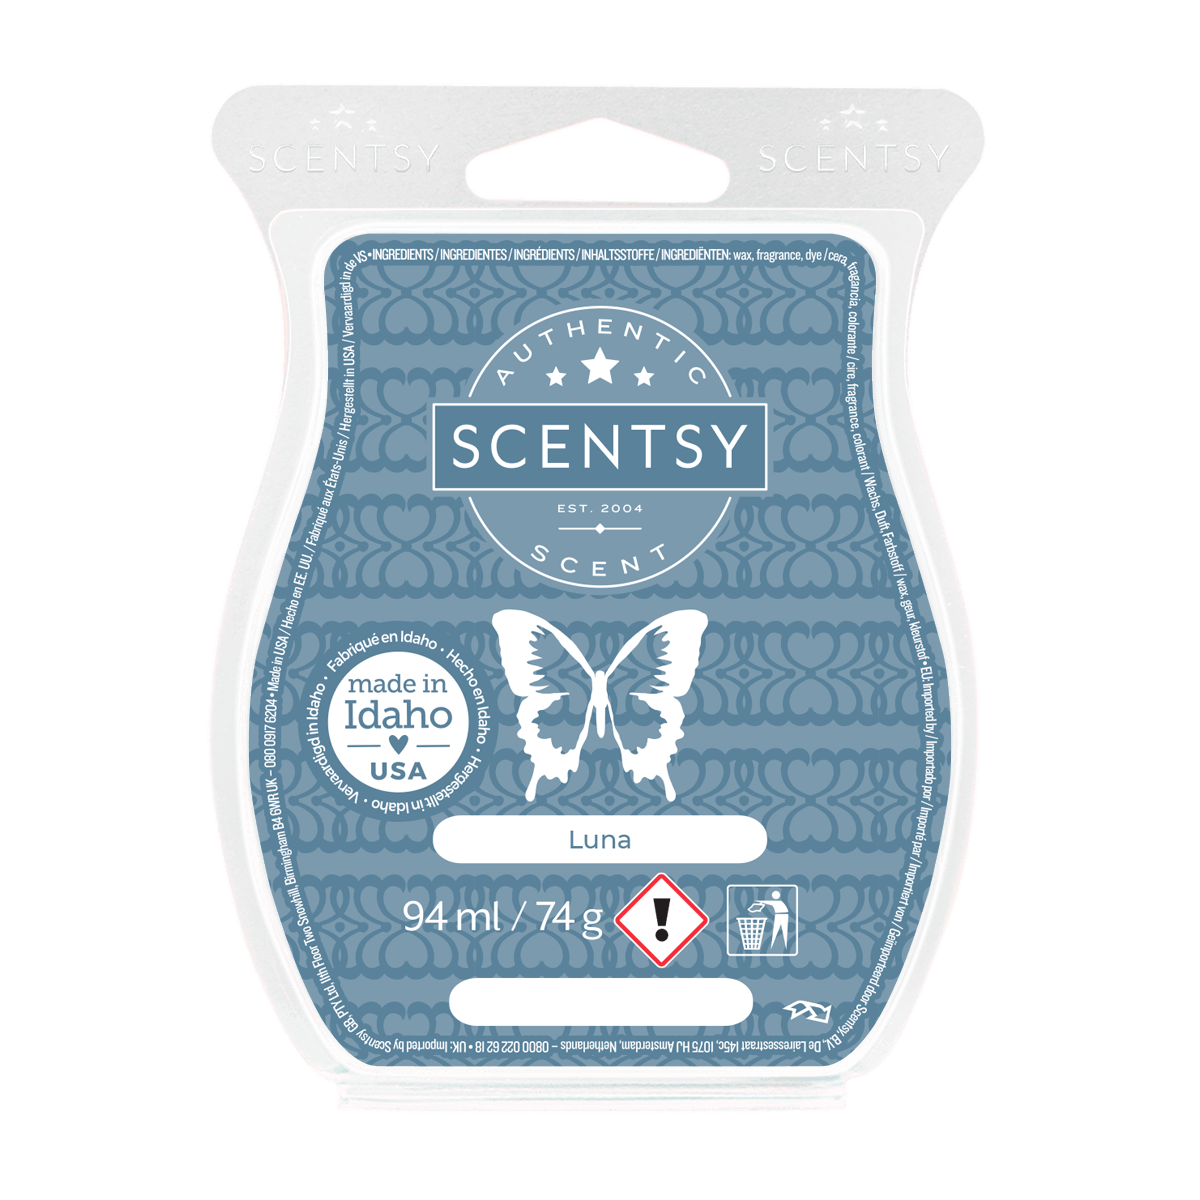 https://imagelive.scentsy.com/cmsimages/products/scentwaxbarlunaisor2fw23pwsc239a96322a24b1e8aeef369f8088083_highres.png